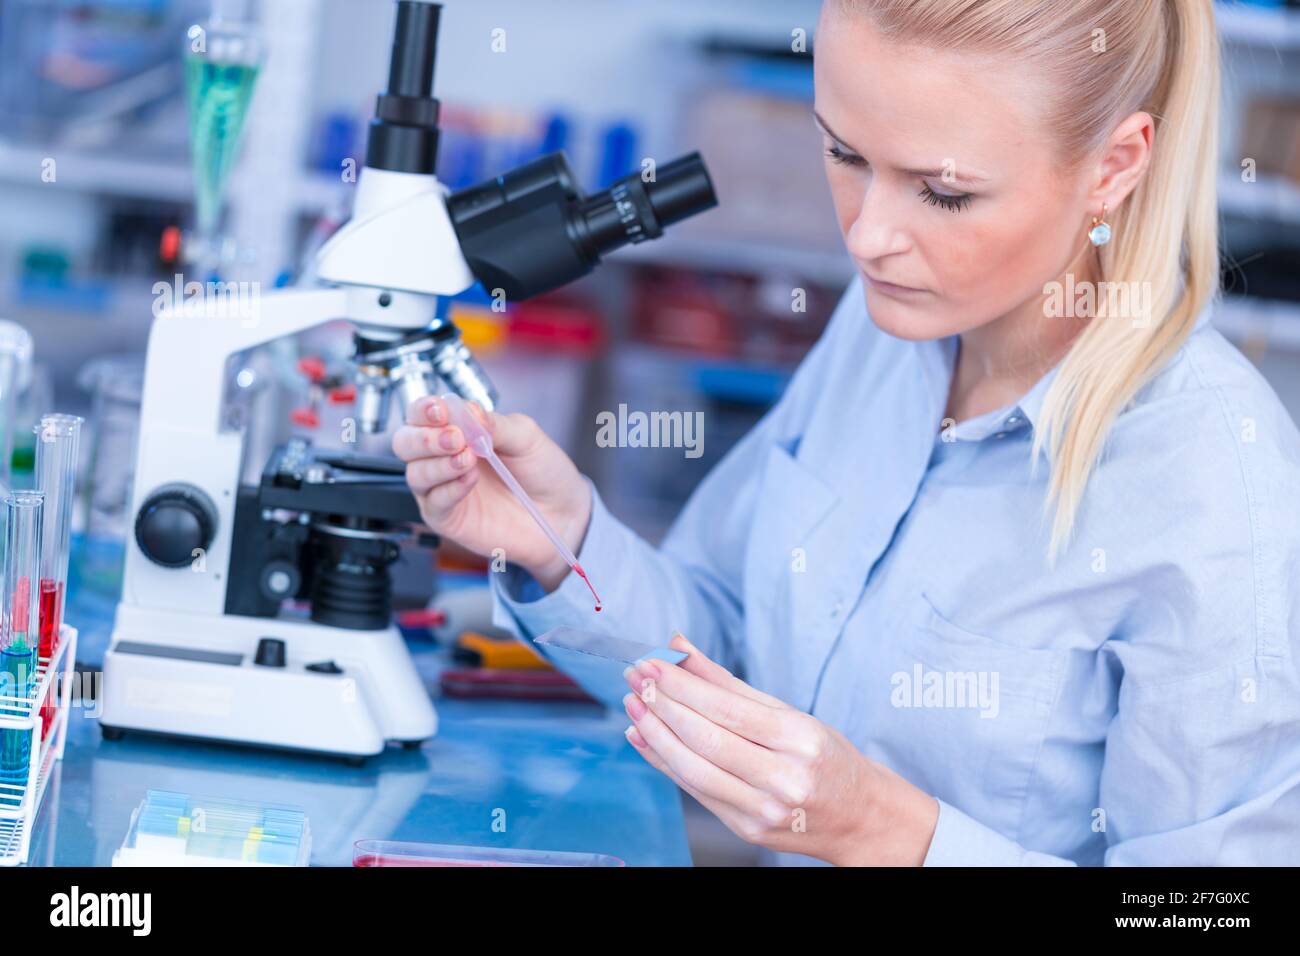 Laboratory assistant uses a polarizing microscope in a microbiological laboratory Stock Photo